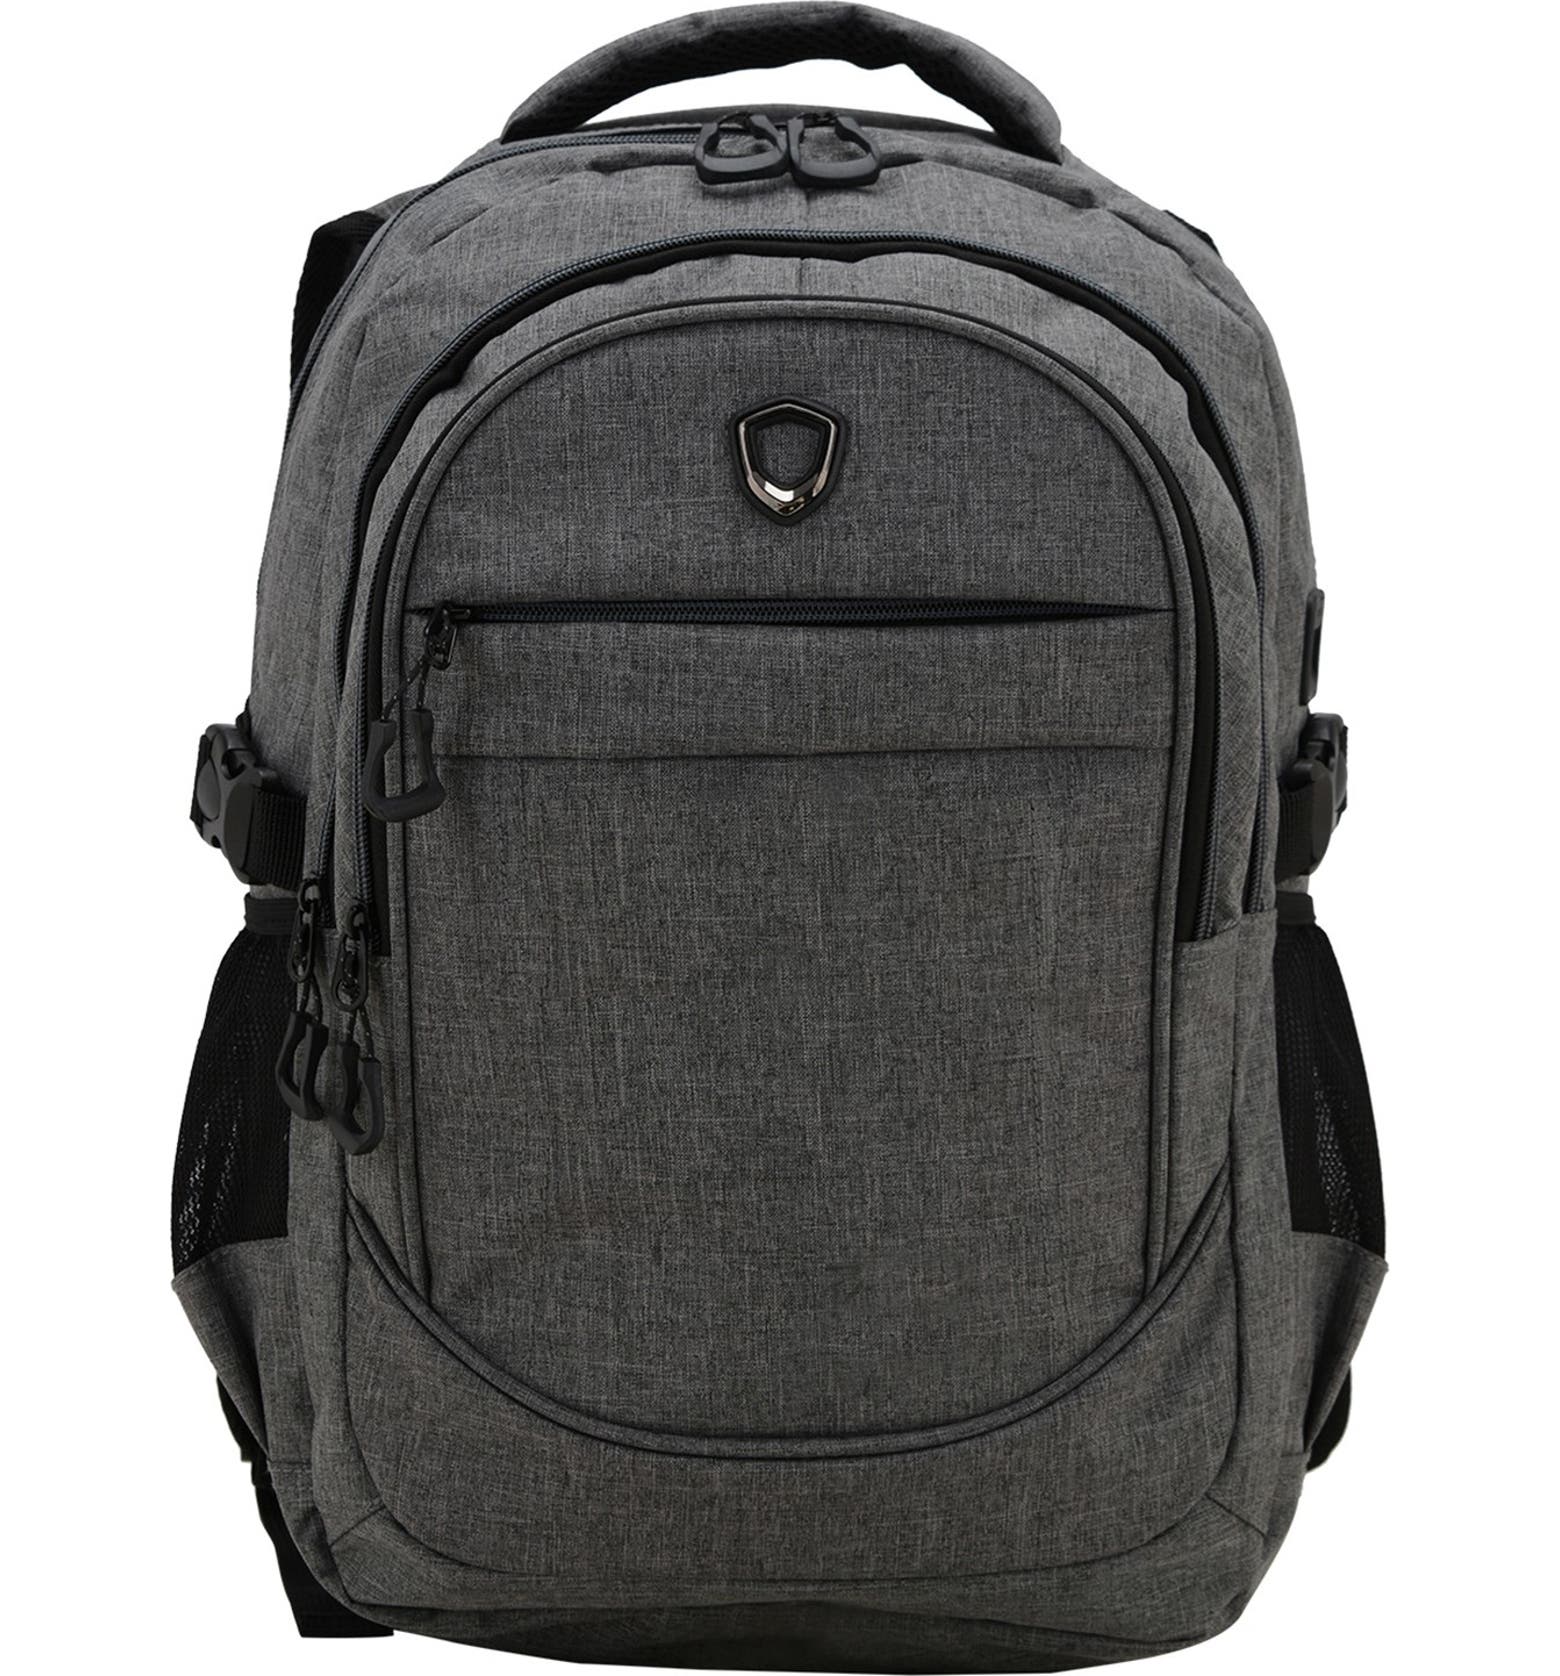 18.75" Traveler’s Choice Heaven’s Gate Backpack w/ USB Port & Laptop Compartment (Brush Grey) $16 + Free Shipping on $89+